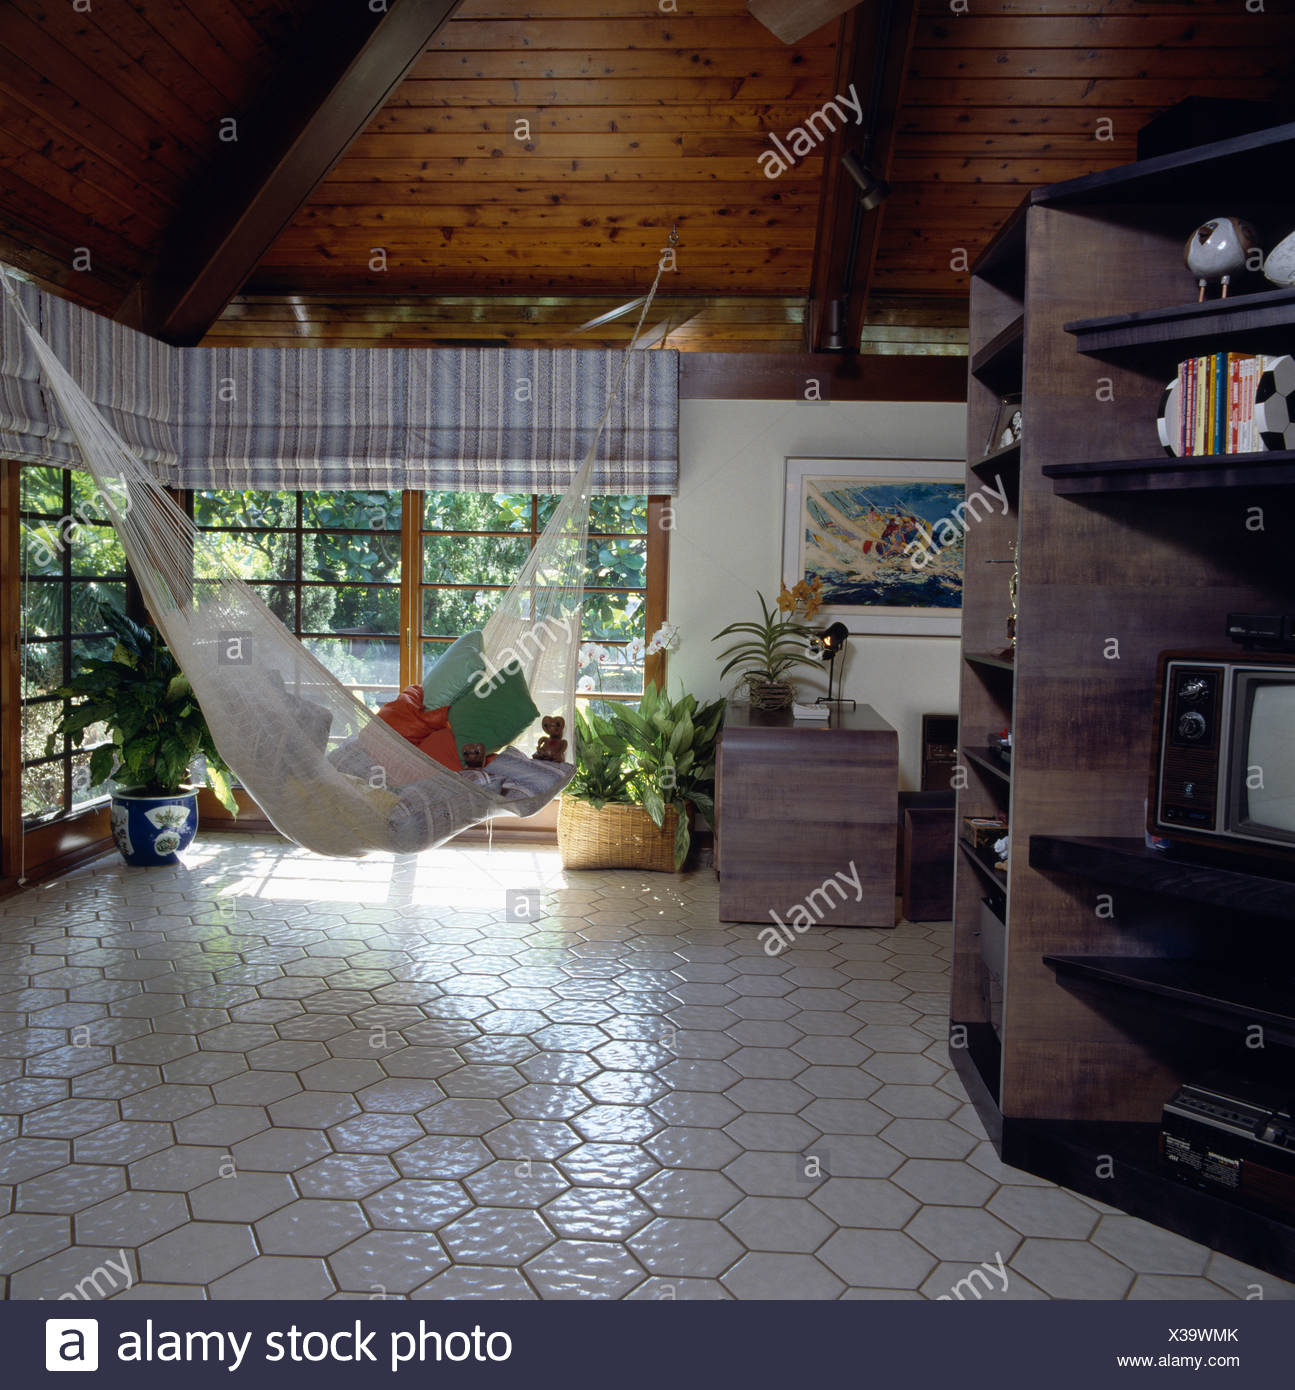 White Tiled Floor And Hammock Suspended From Wooden Ceiling In